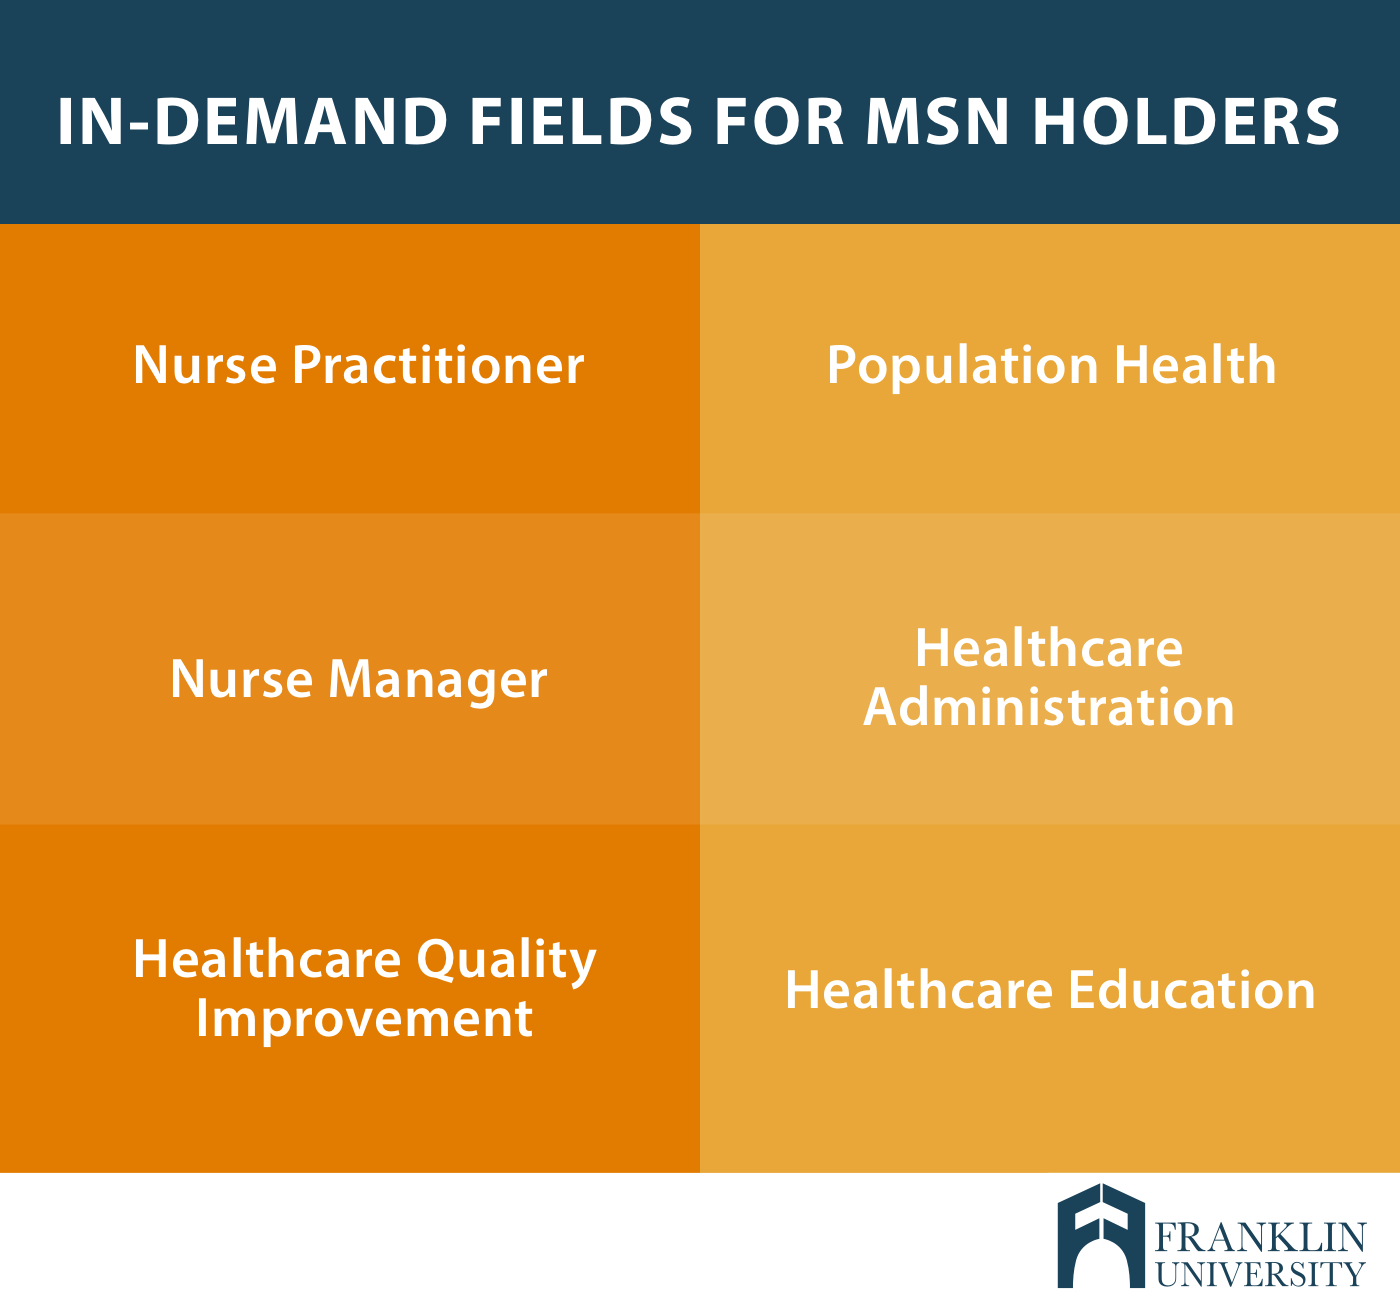 graphic describes in-demand fields for MSN holders